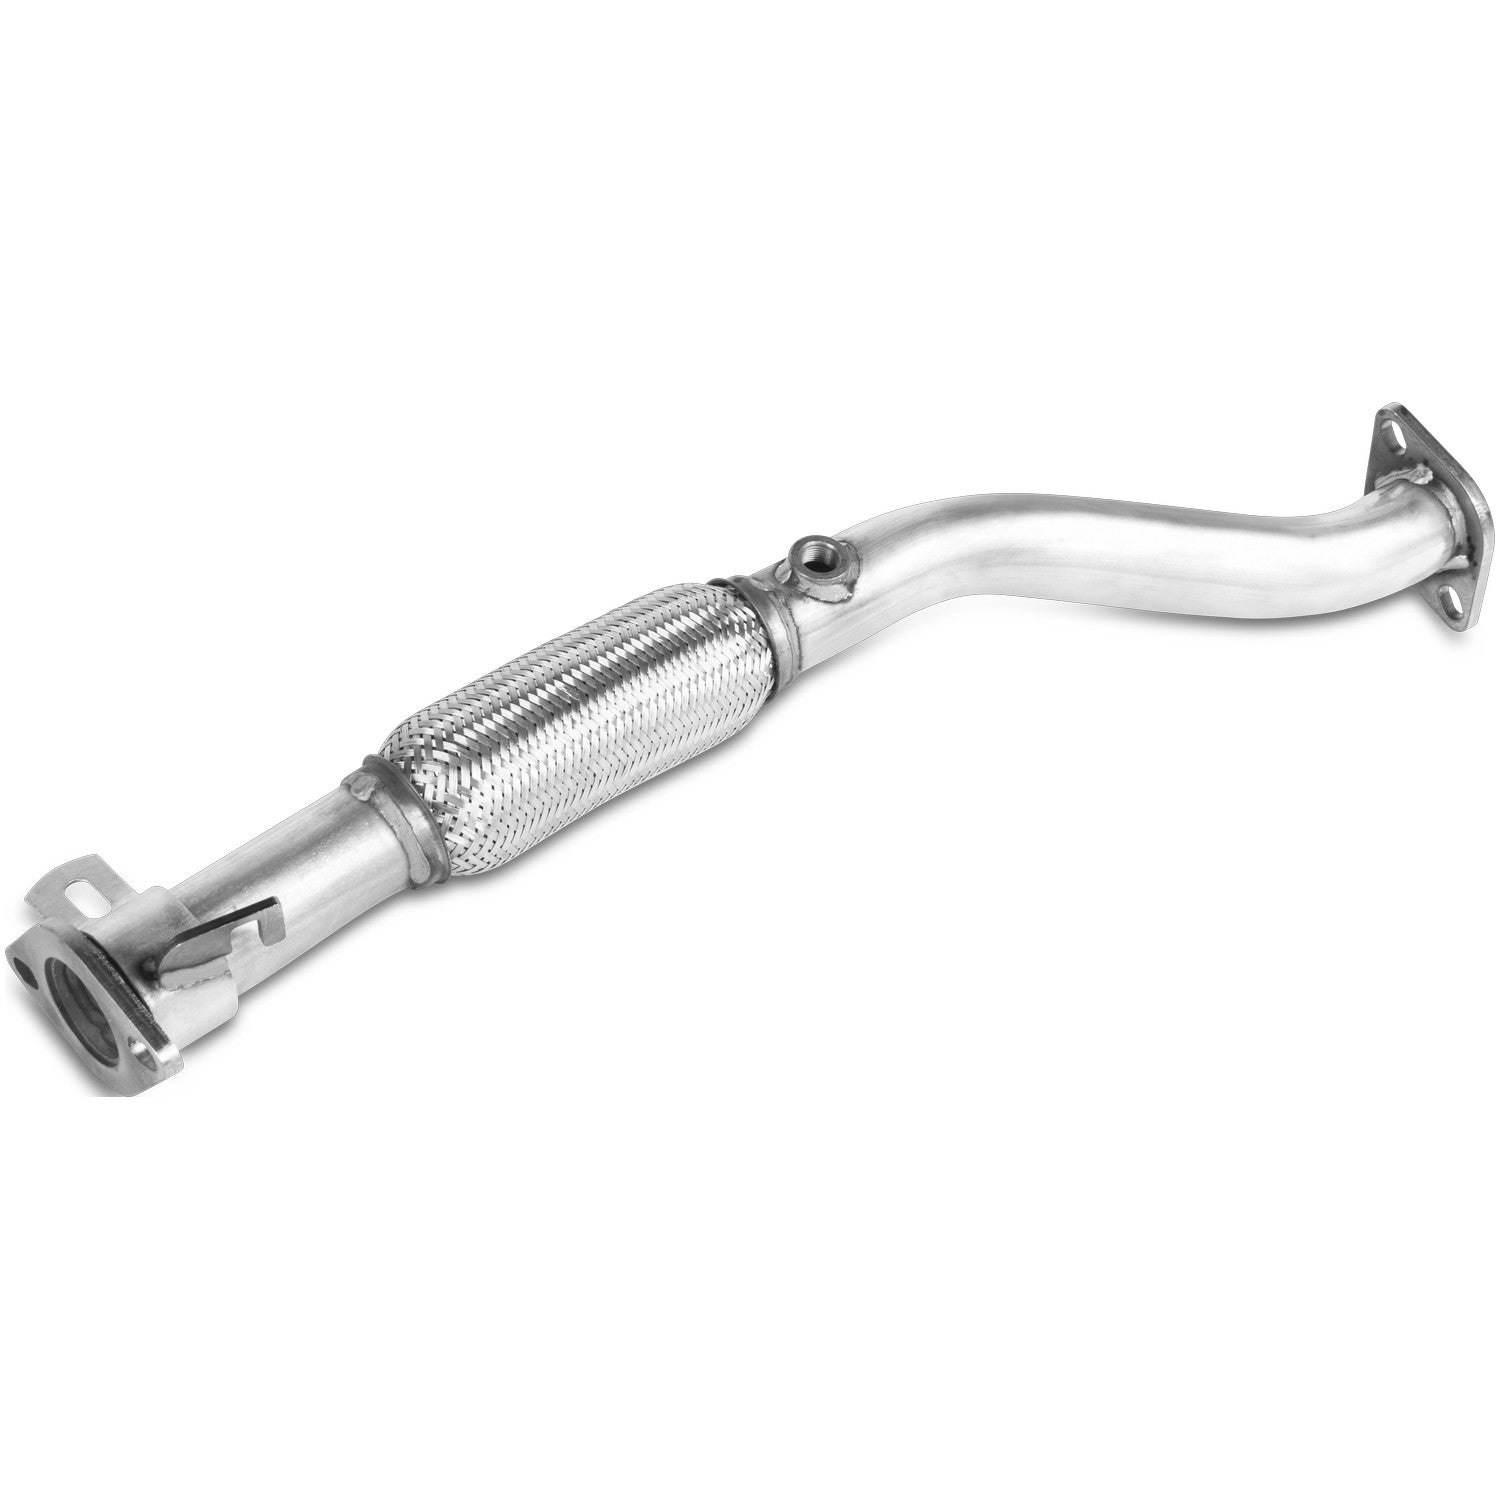 Bosal 750-153 Front Exhaust Pipe for Hyundai Elantra Kia Spectra Spectra5 FWD L4 2.0L